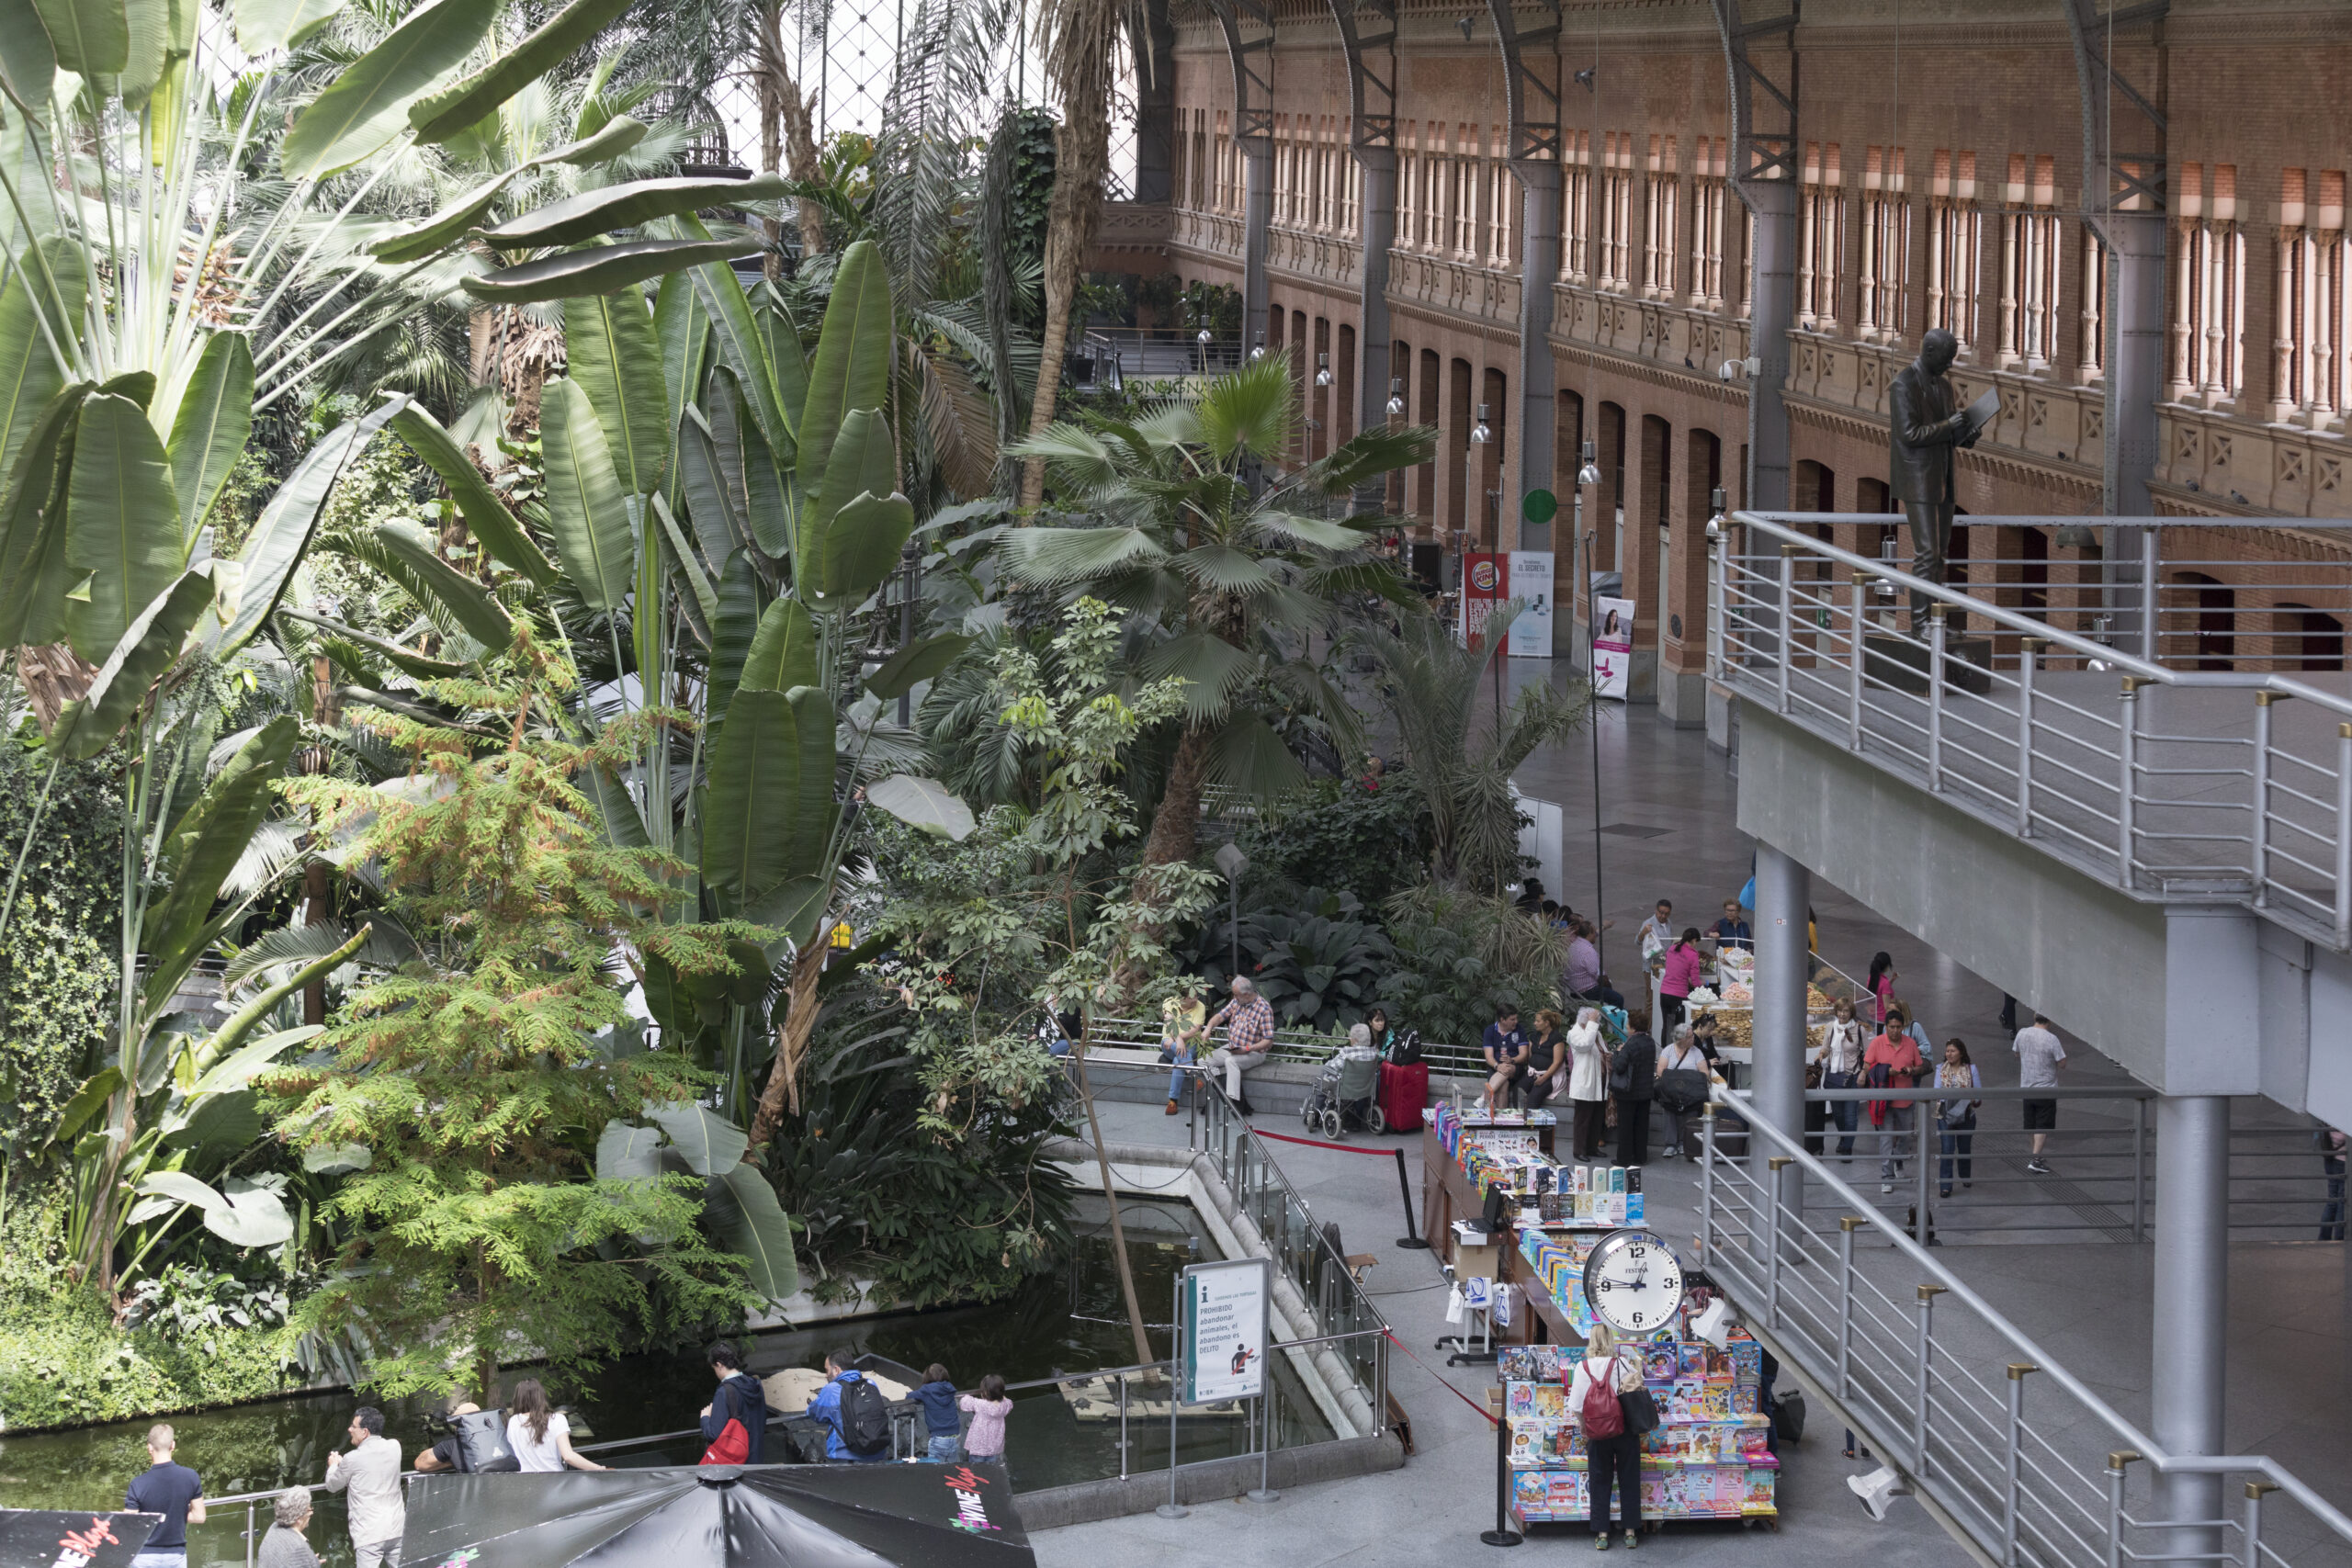 The interior of Atocha railway station in Madrid, showcasing its historic architecture and bustling surroundings.